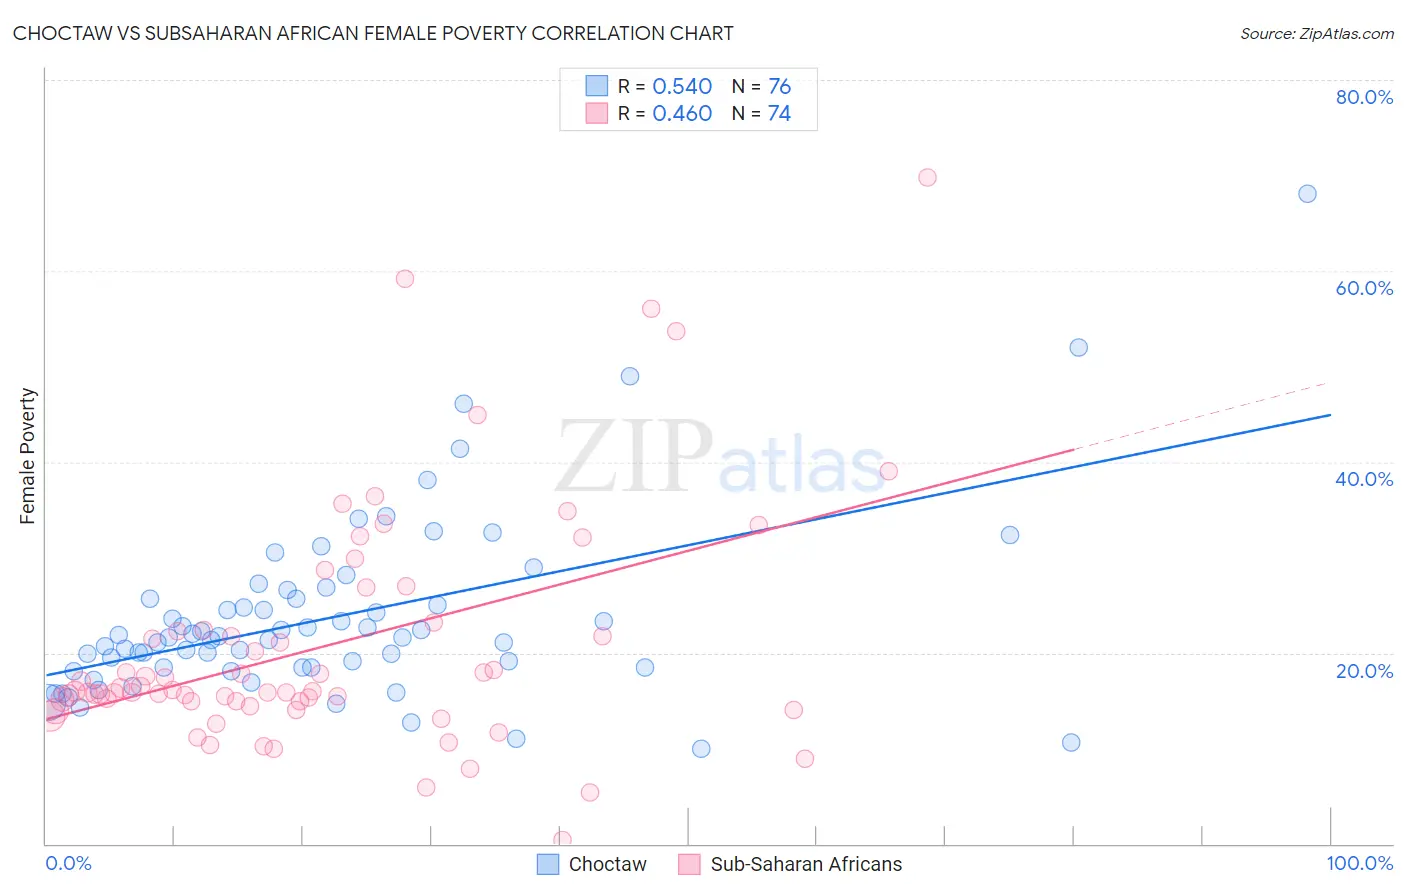 Choctaw vs Subsaharan African Female Poverty